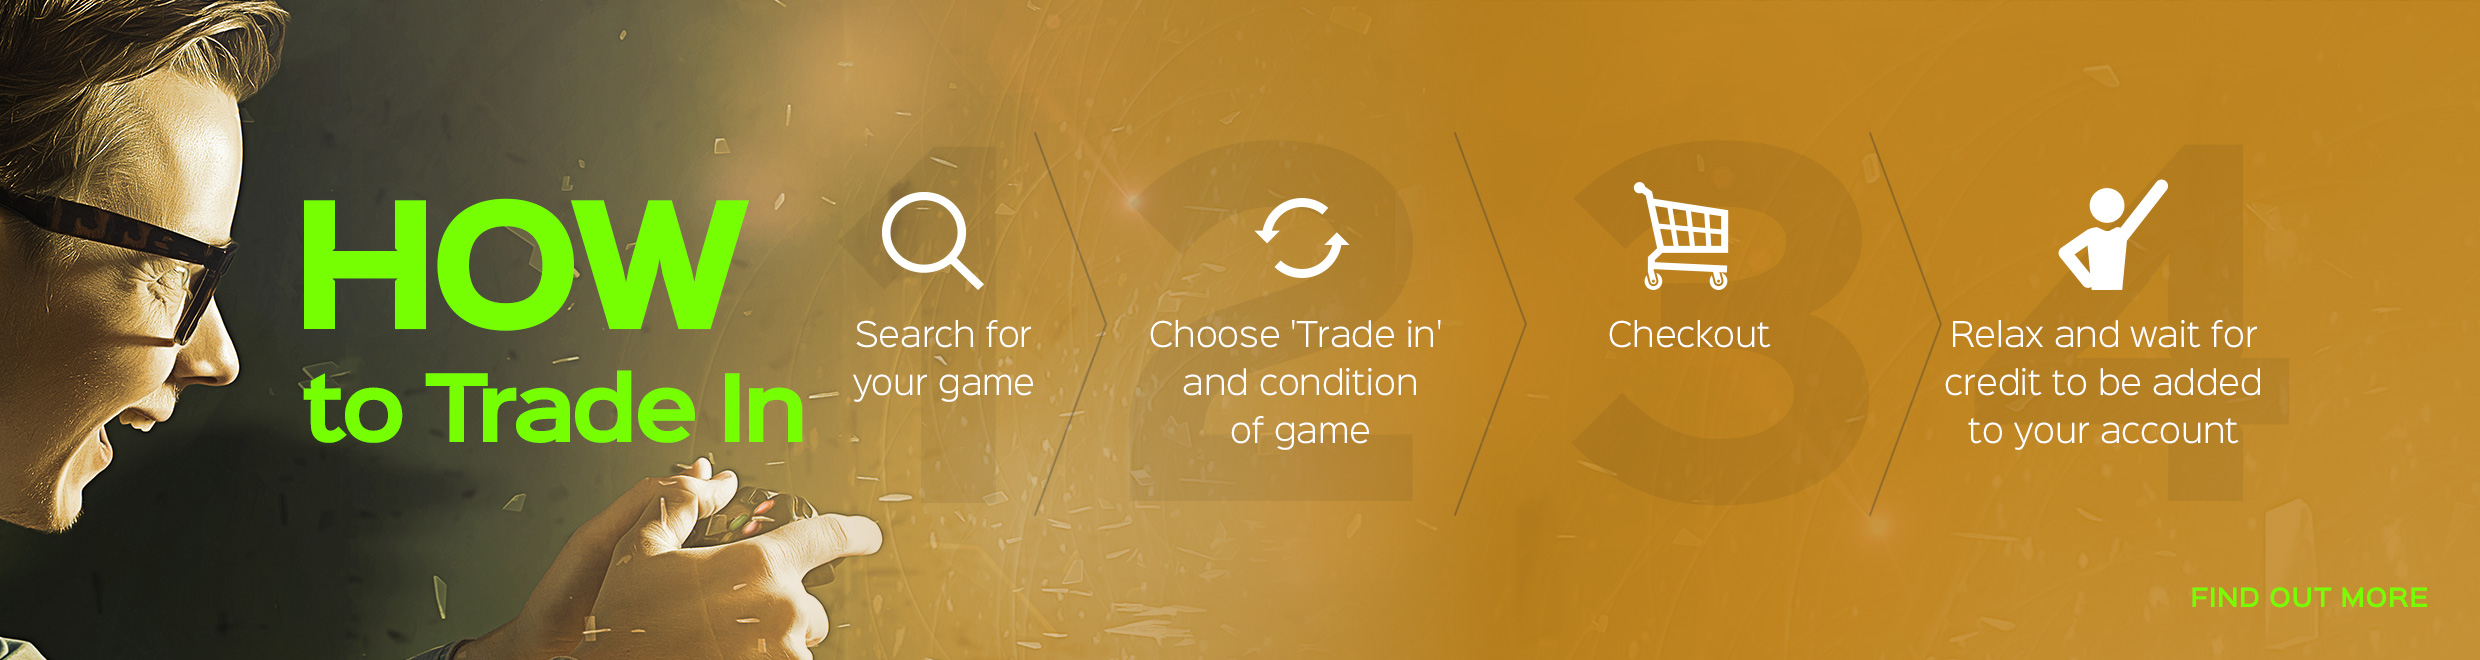 How to Trade In Your Games